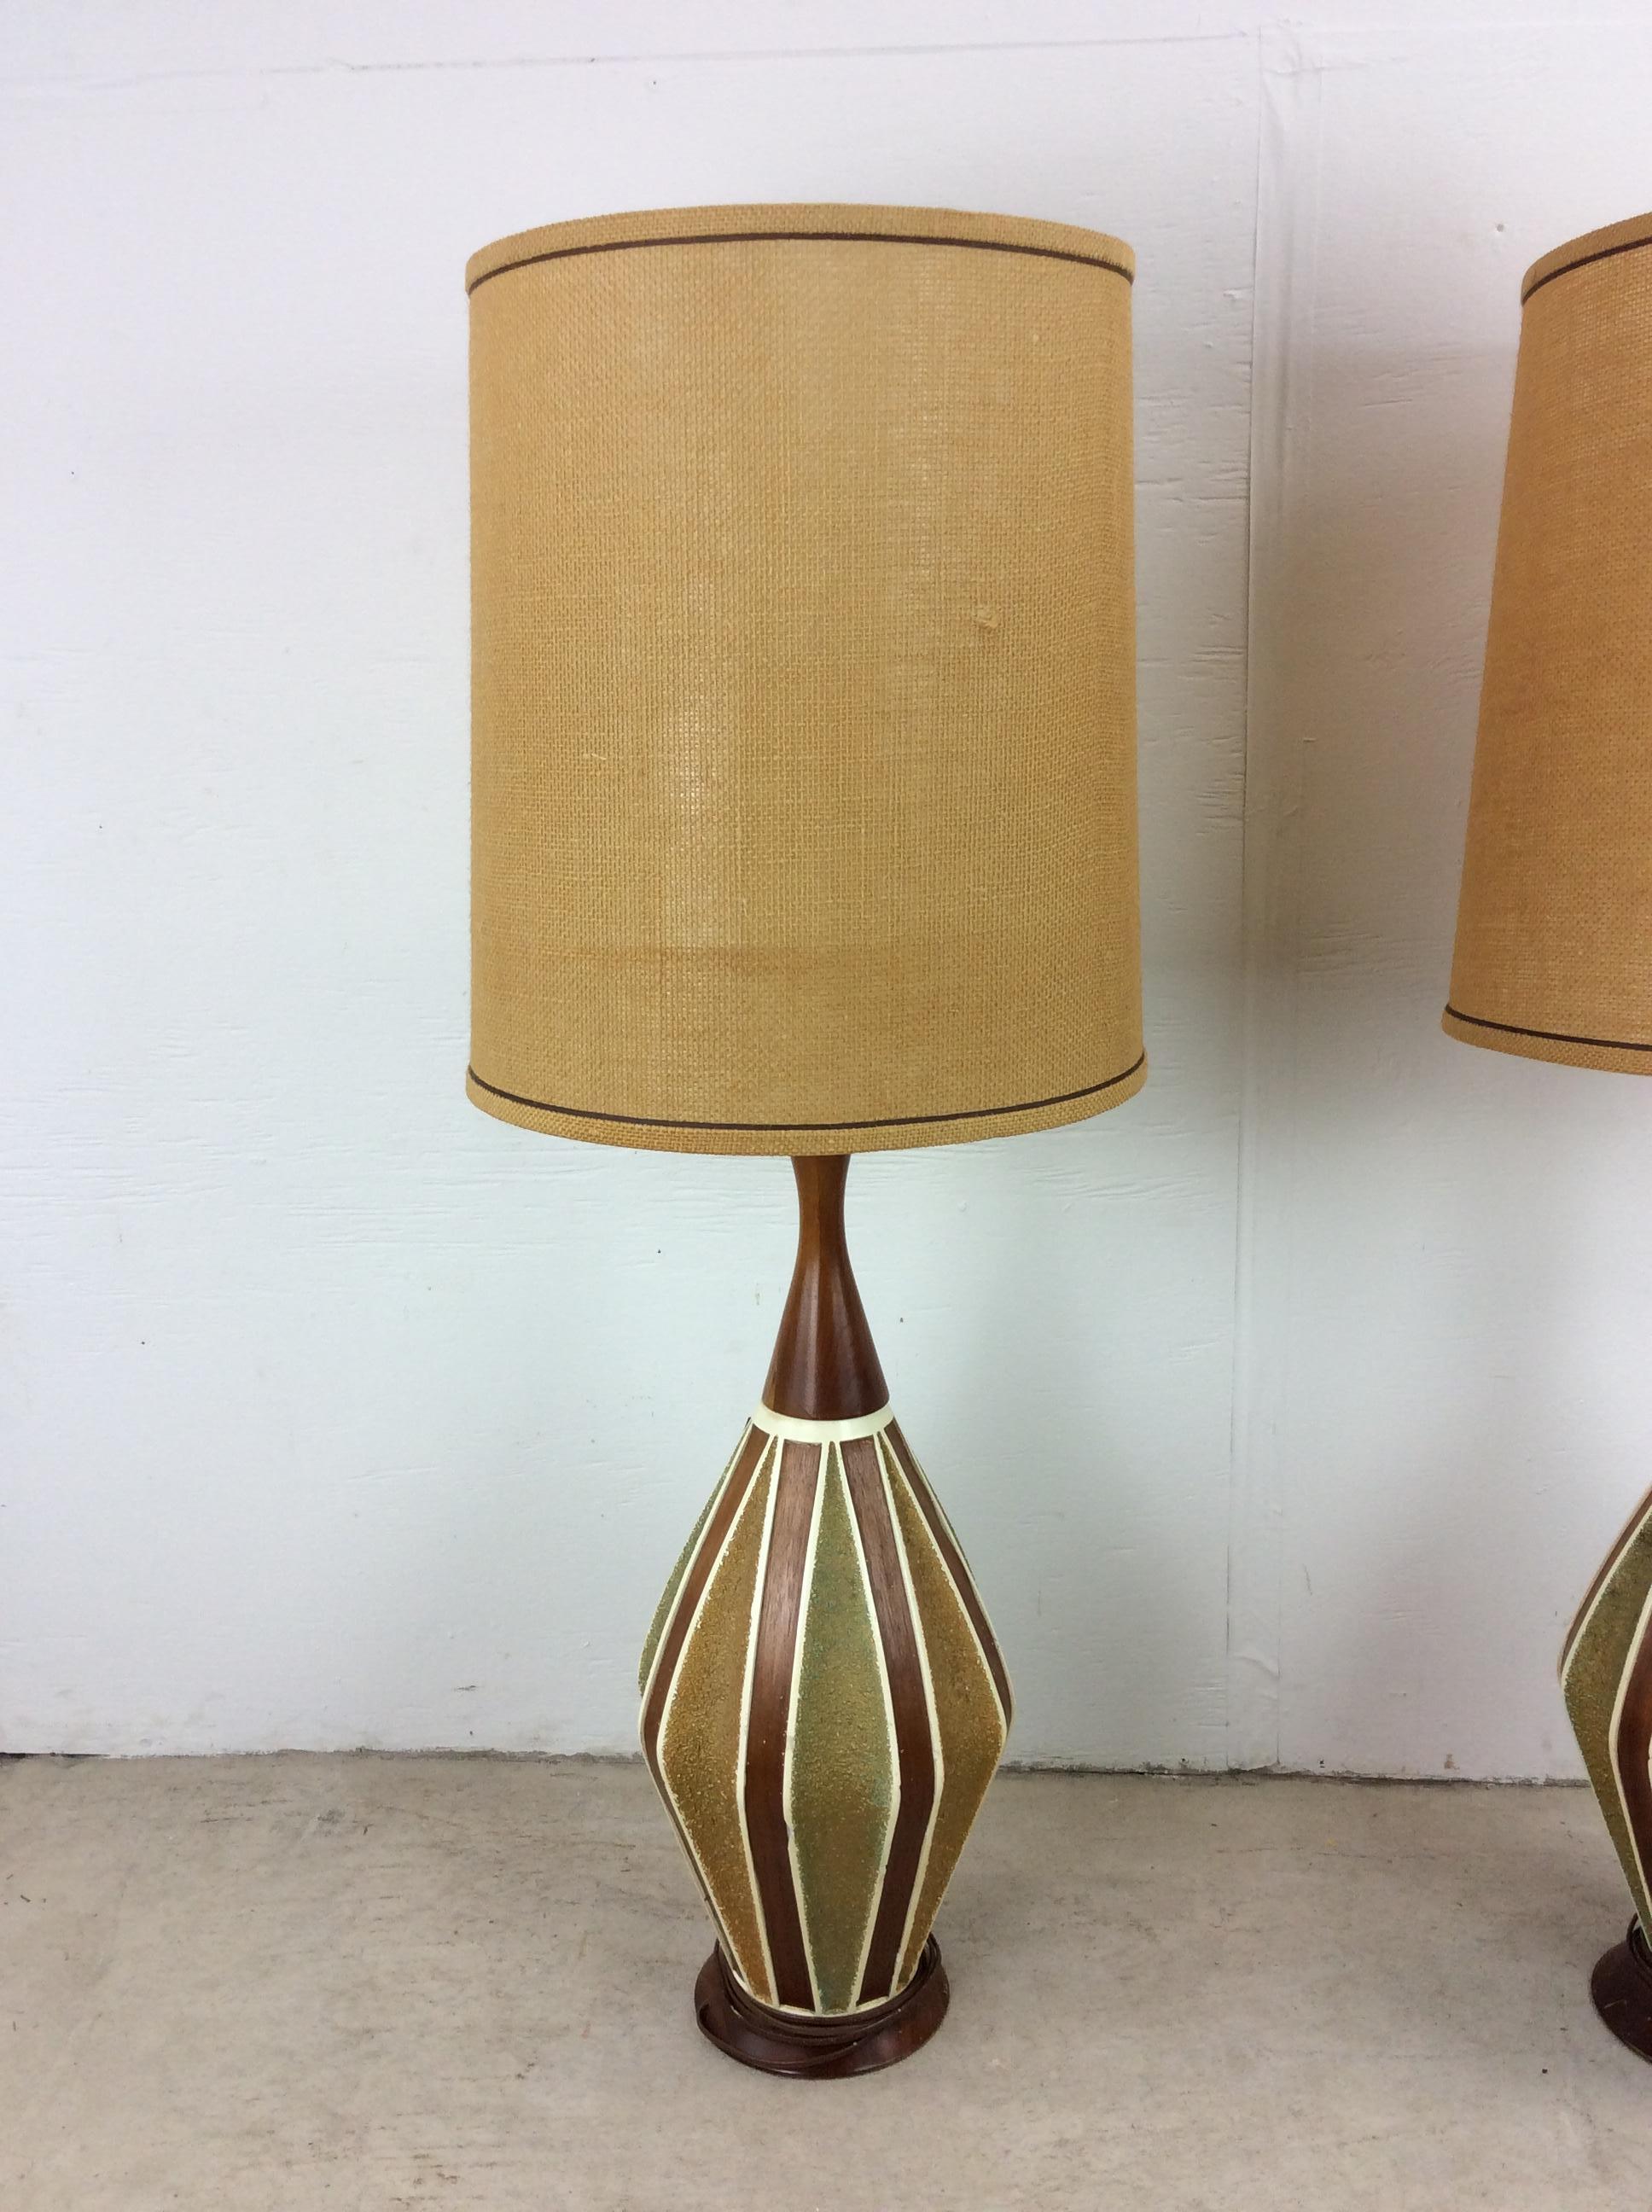 20th Century Pair of Mid Century Modern Ceramic Table Lamps with Barrel Shade For Sale